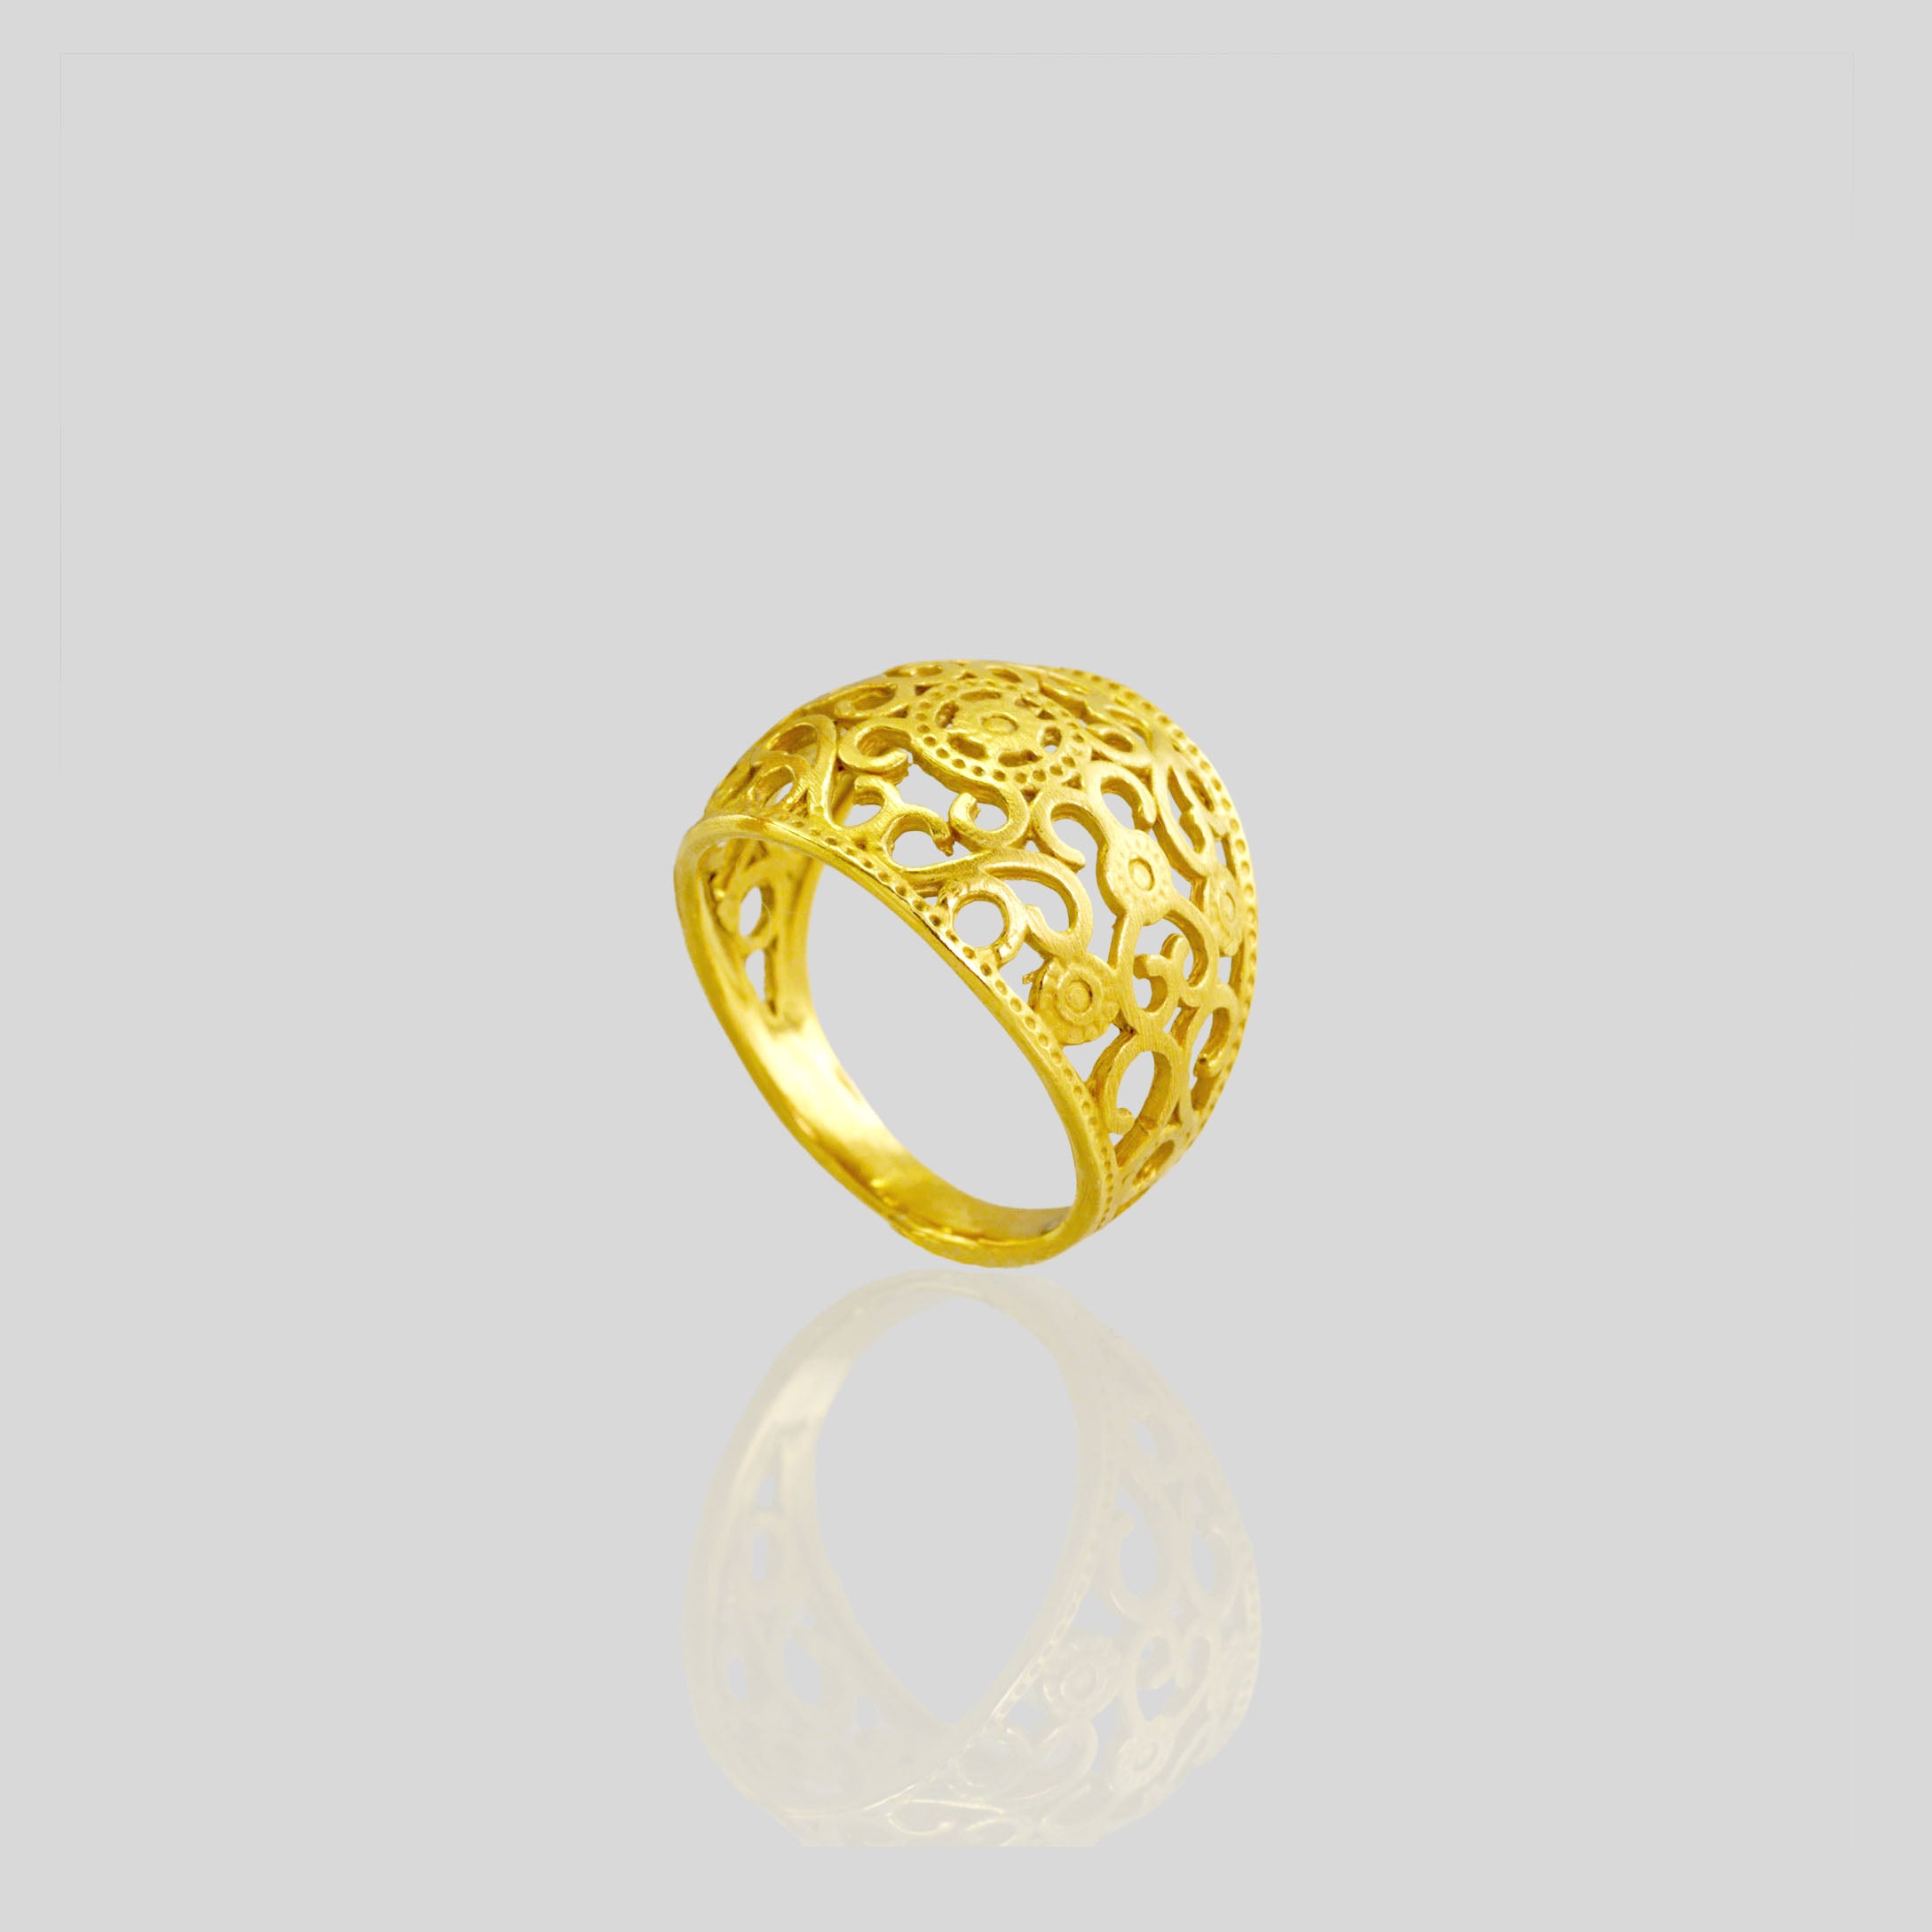 Ornamental 18k Gold Ring featuring intricate embroidery artistry for a regal elegance. Expert craftsmanship and lightweight design ensure exquisite comfort.